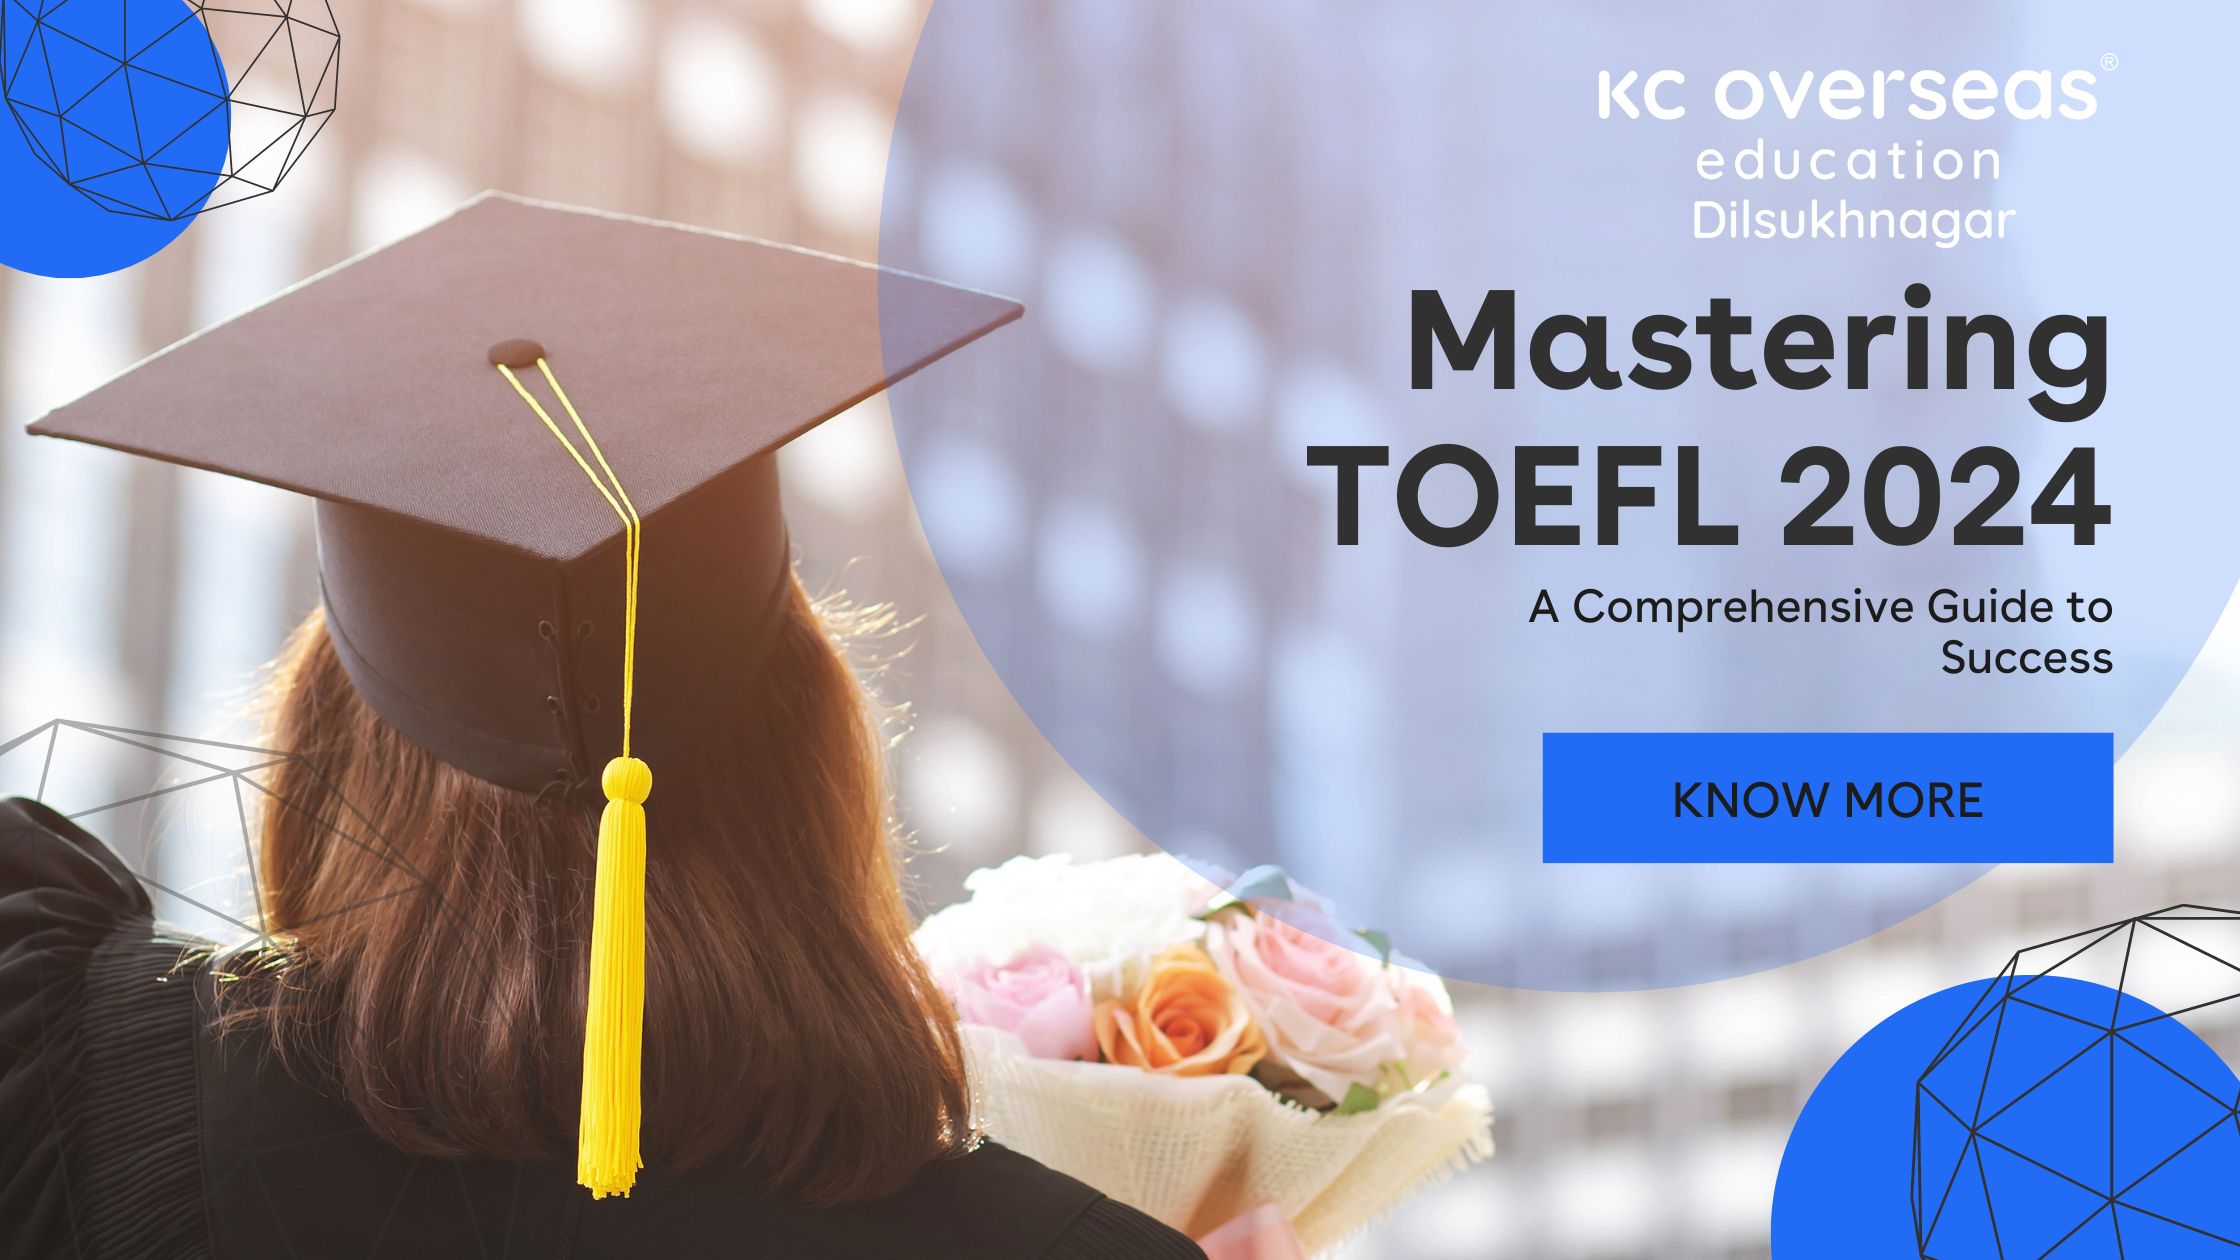 Mastering TOEFL 2024: A Comprehensive Guide to Success